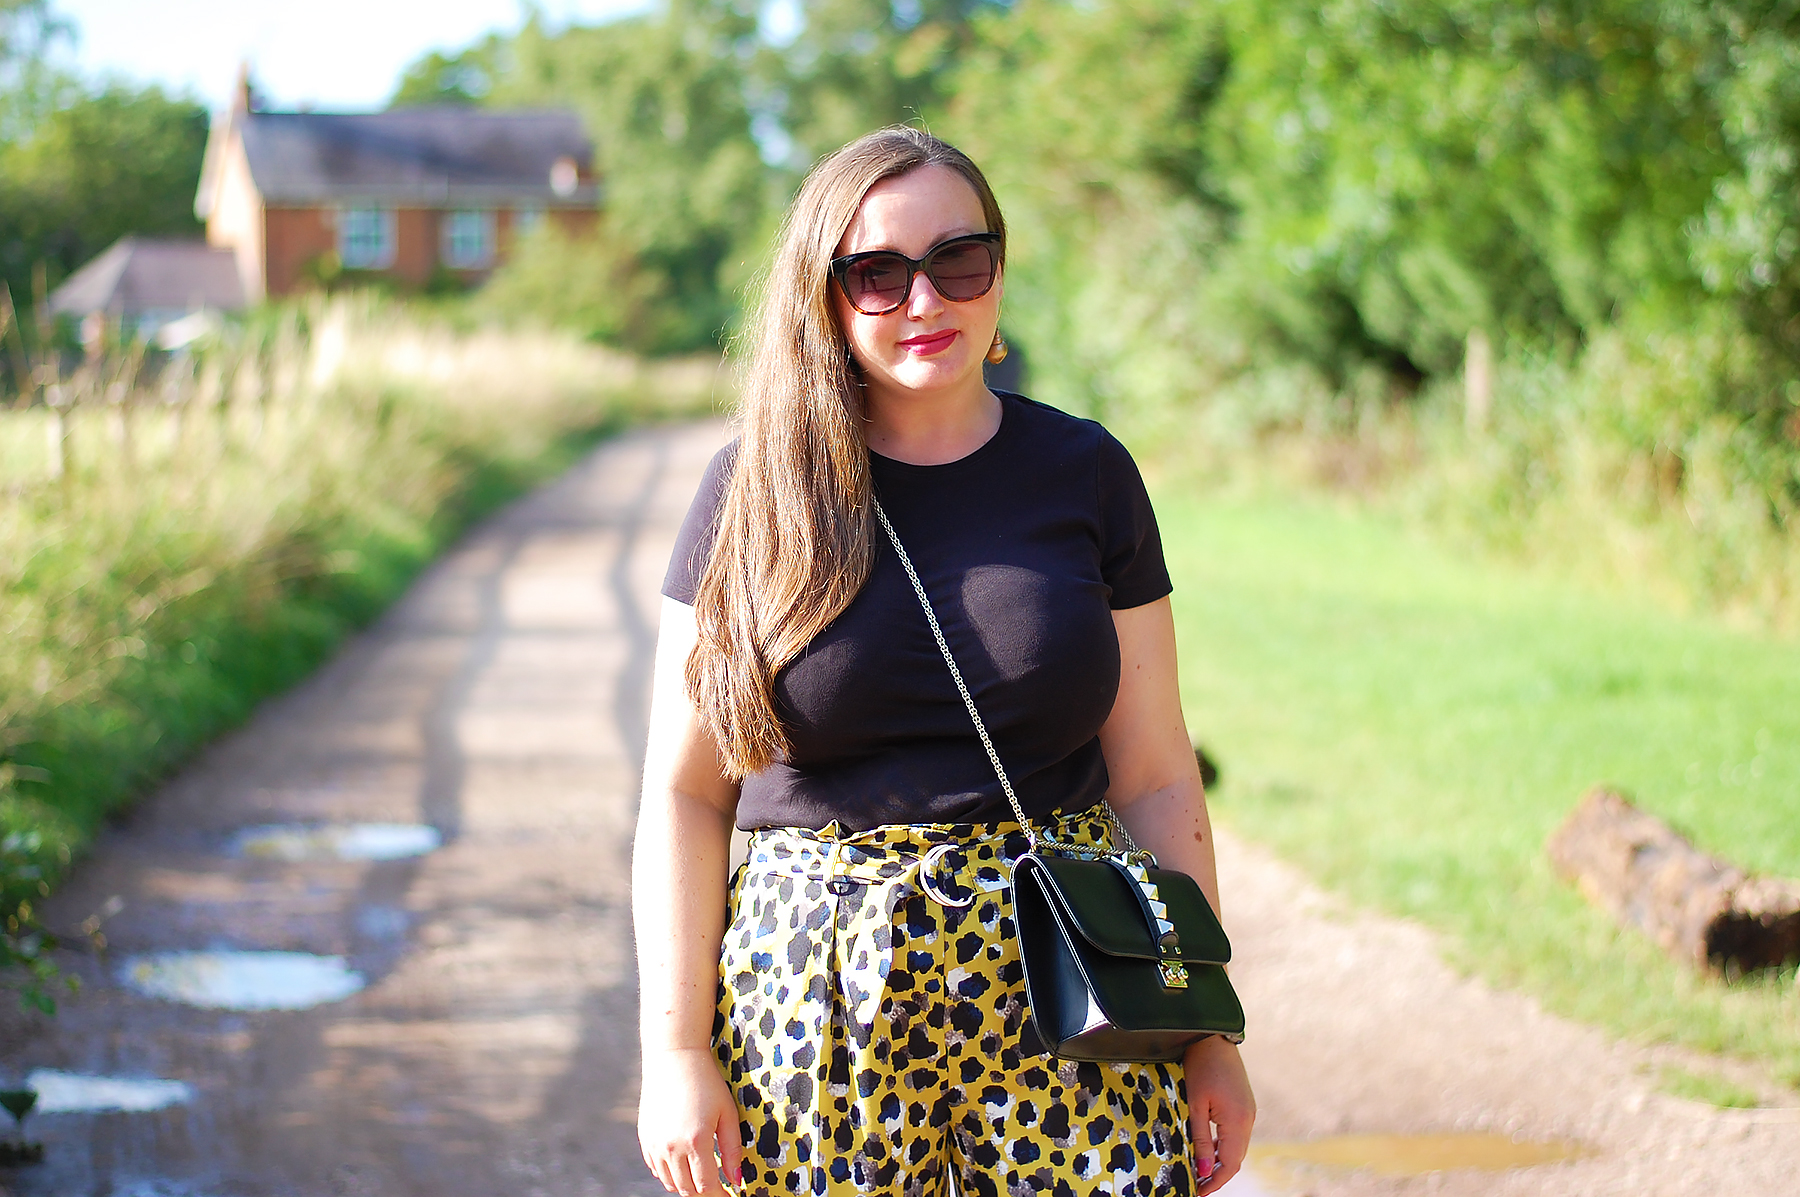 How to style yellow animal print